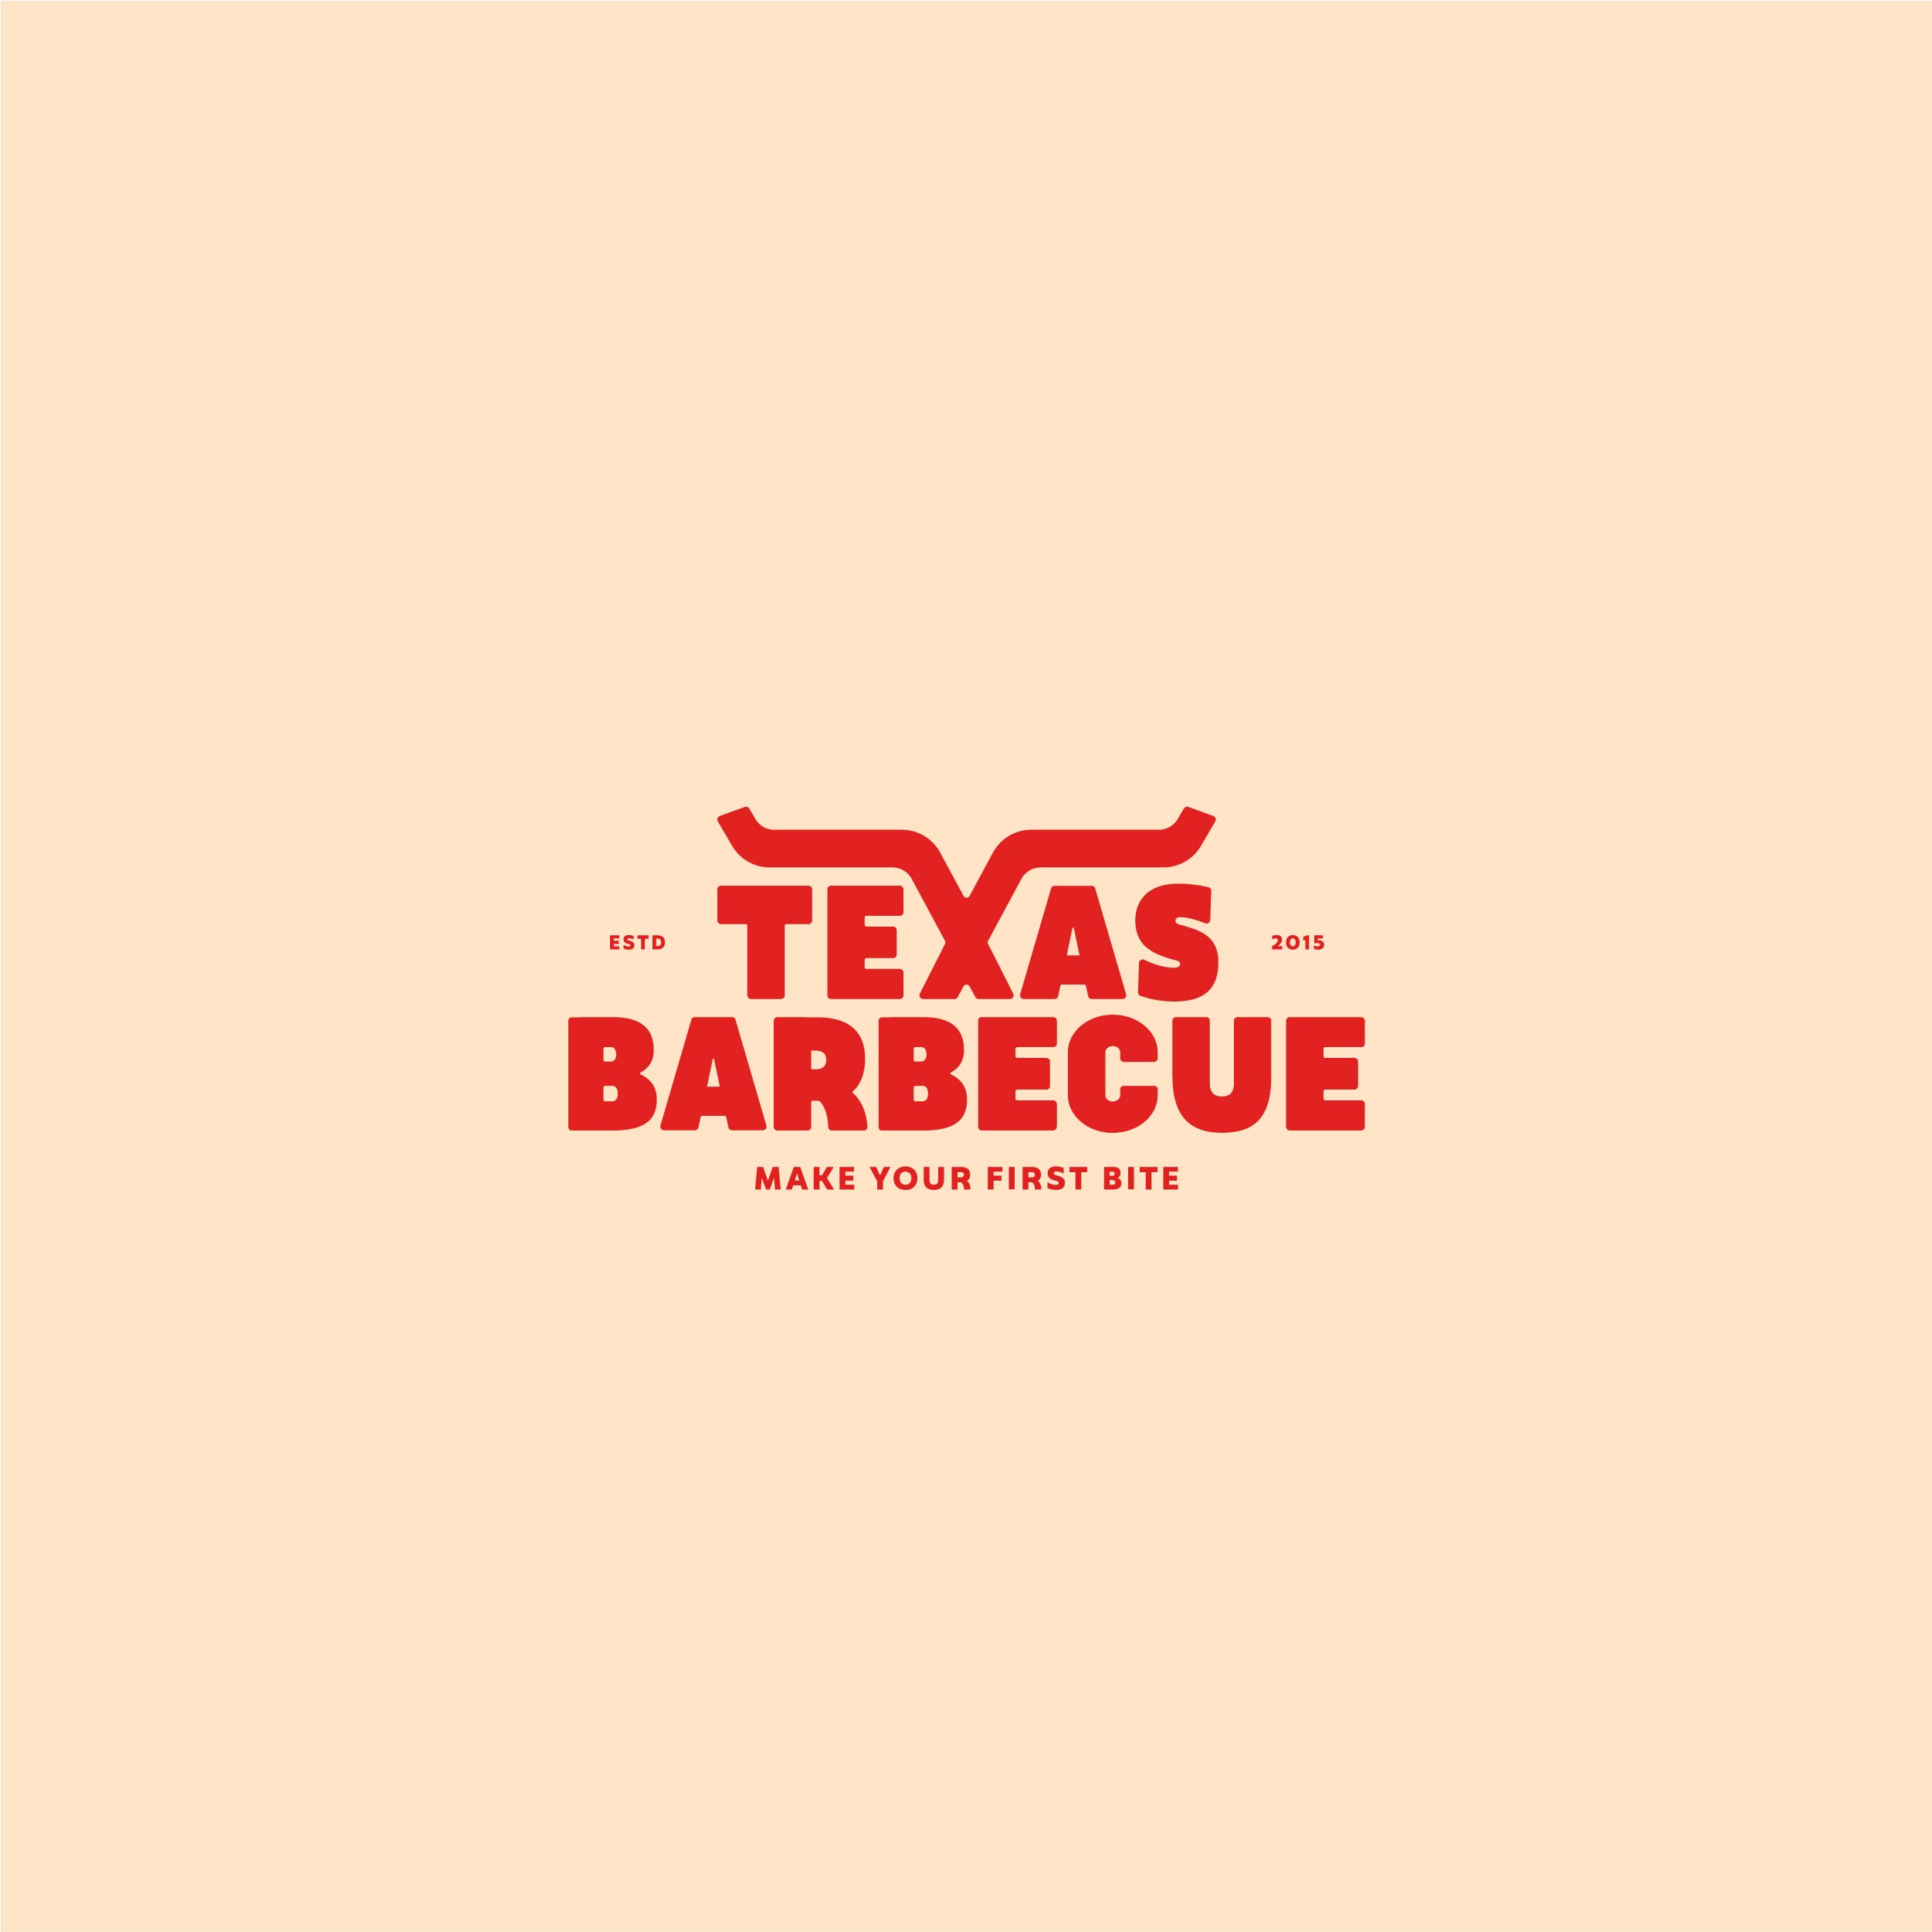 Texas Barbecue Packaging Design